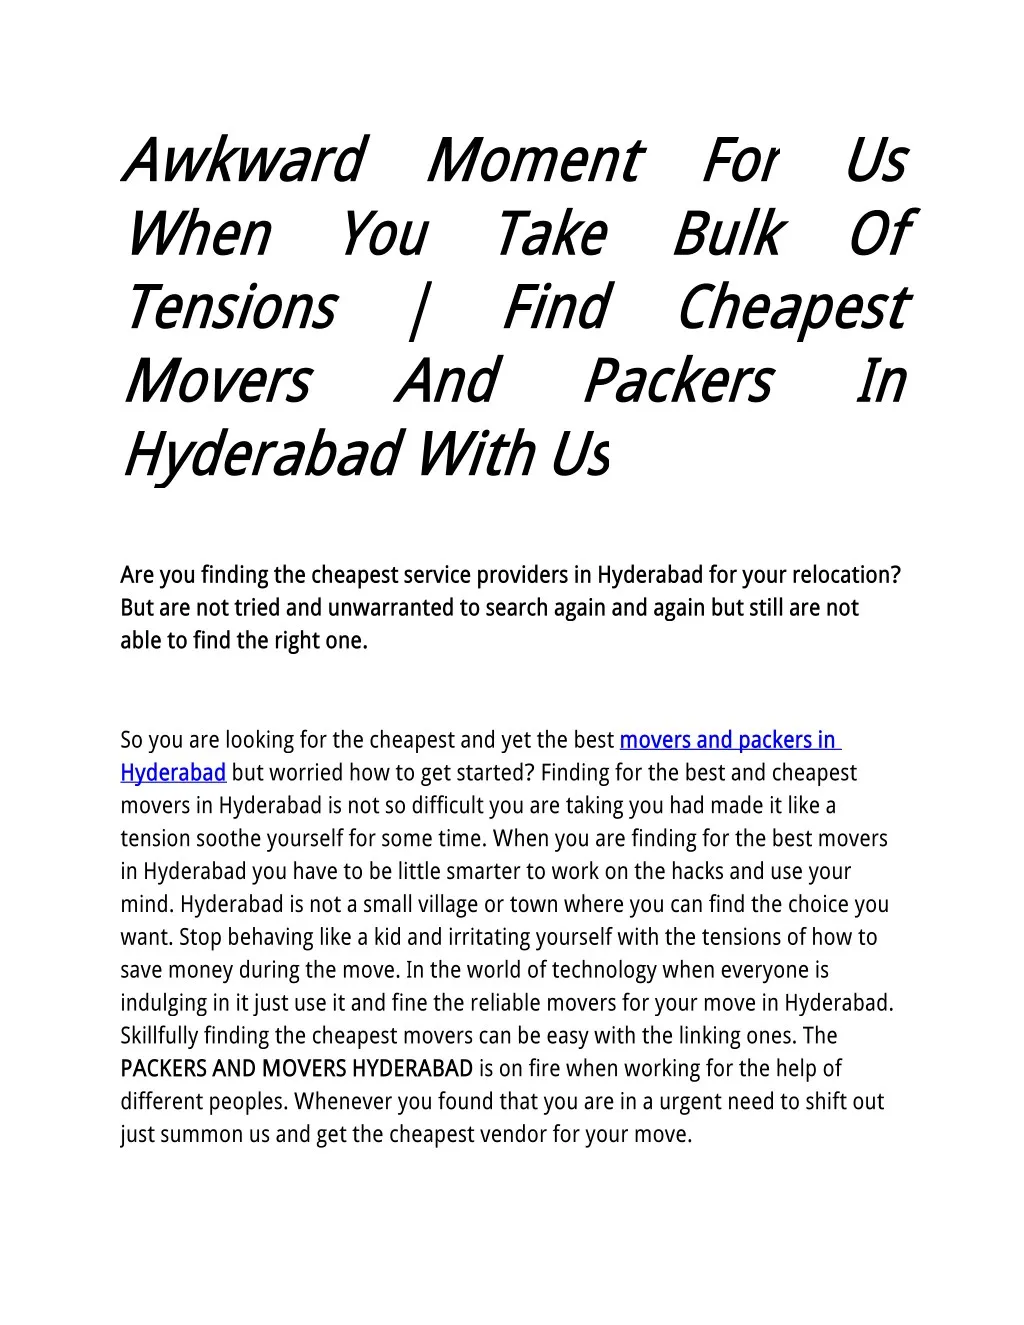 awkward when tensions movers hyderabad with us